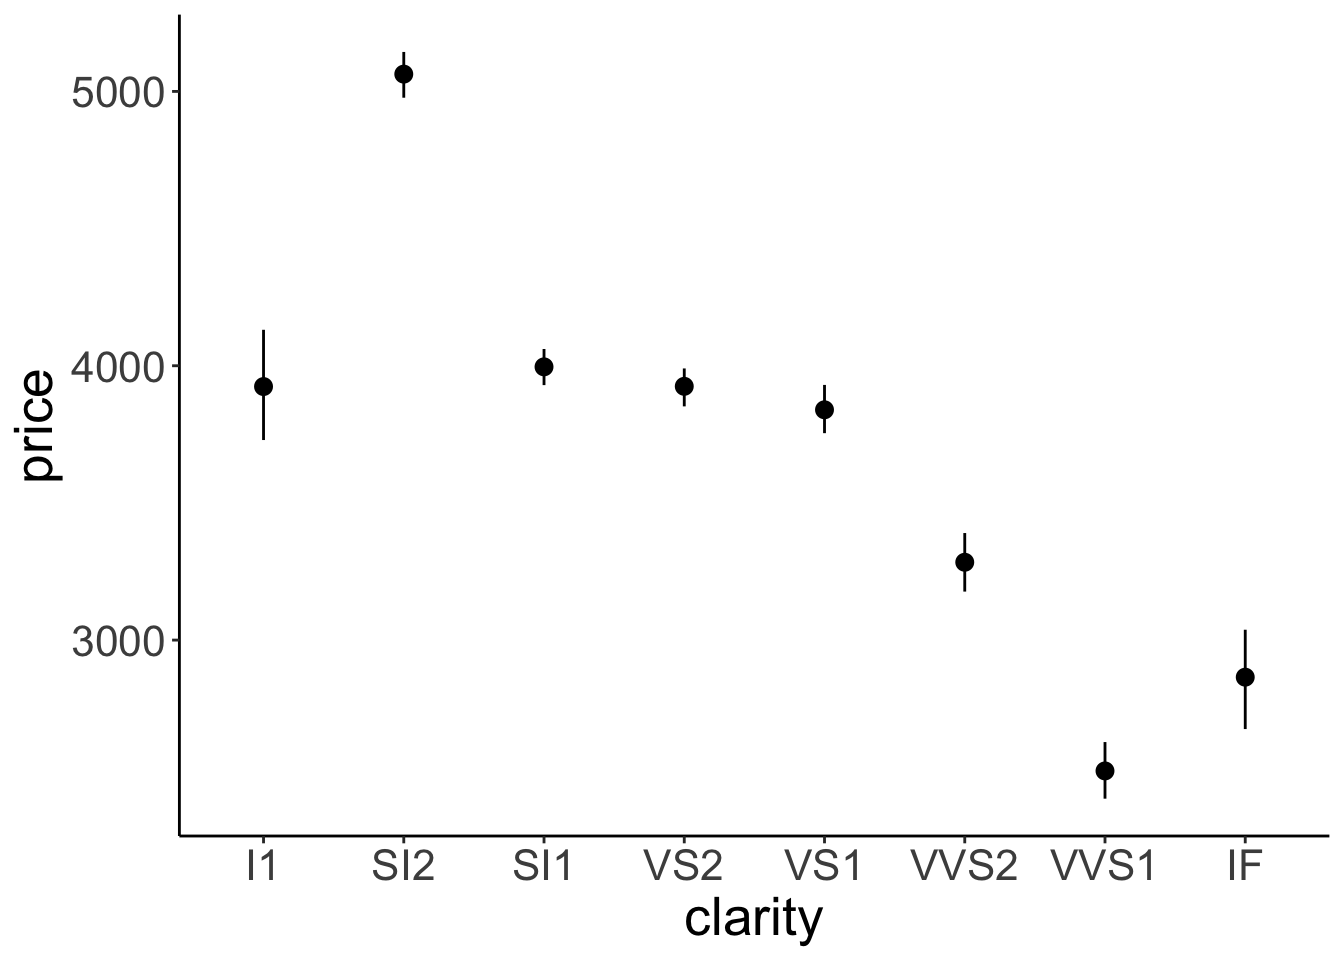 Relationship between diamond clarity and price. Error bars indicate 95% bootstrapped confidence intervals.